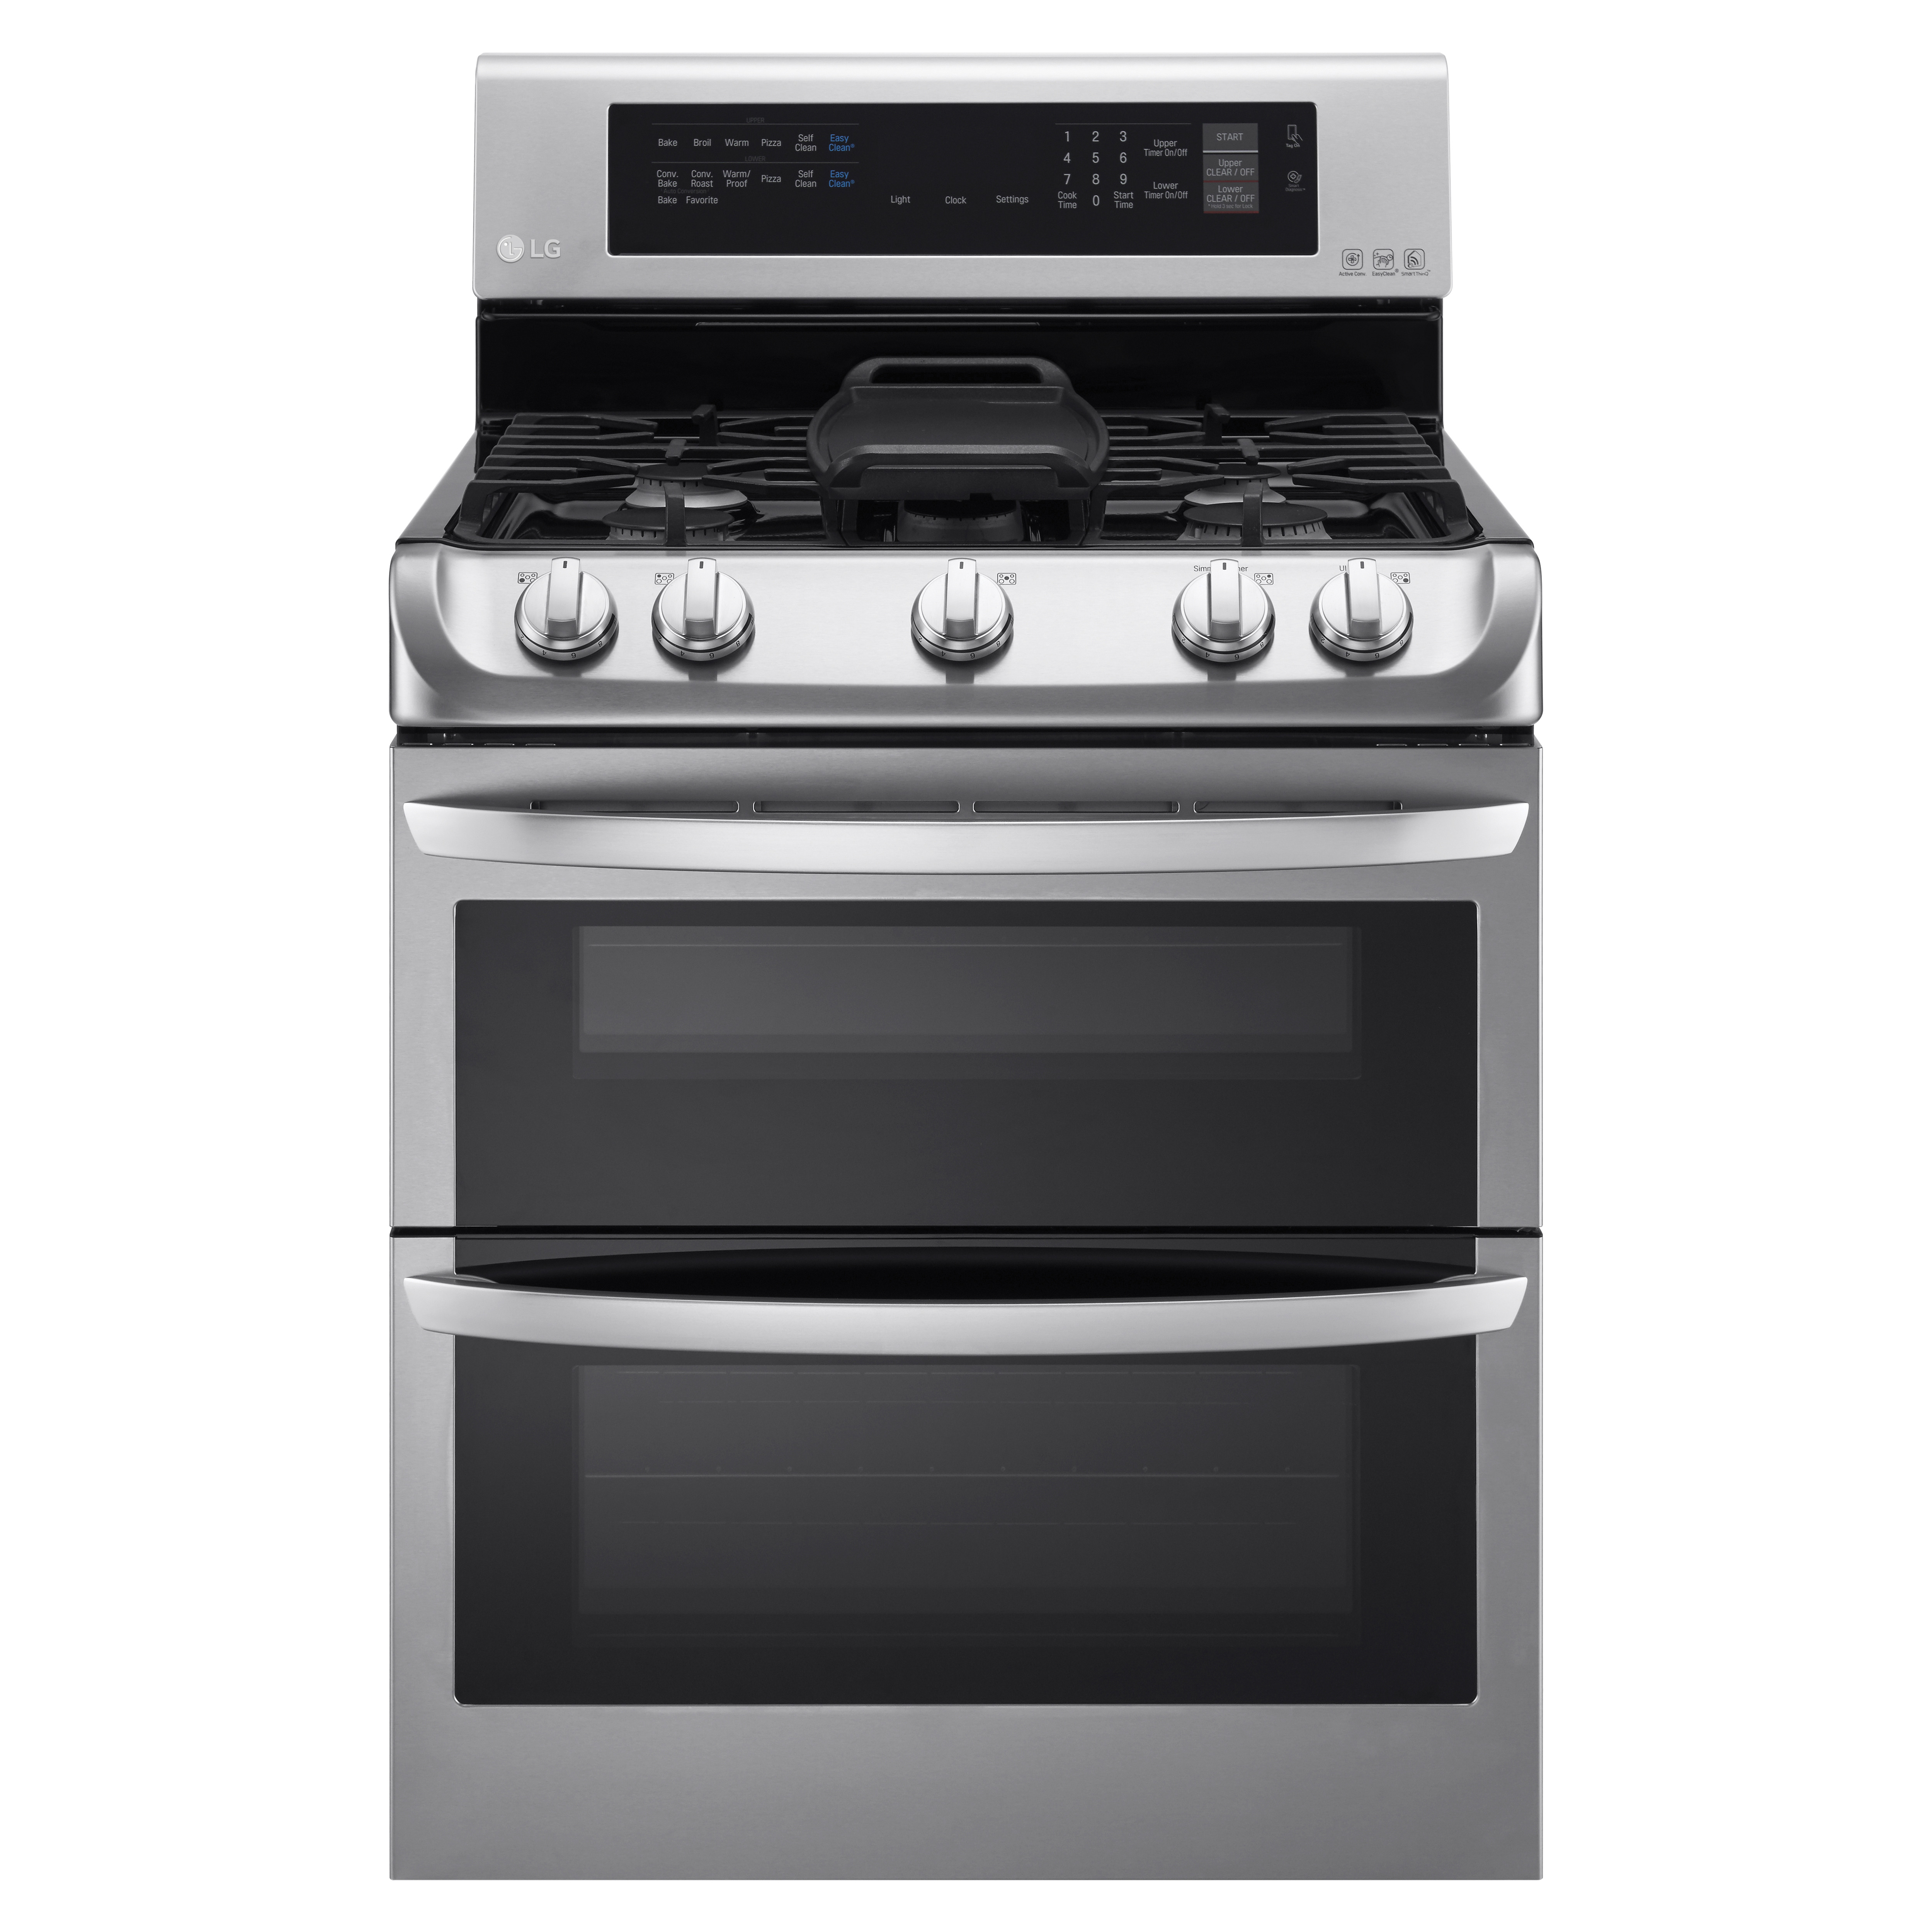 LG ProBake Double Oven at Best Buy